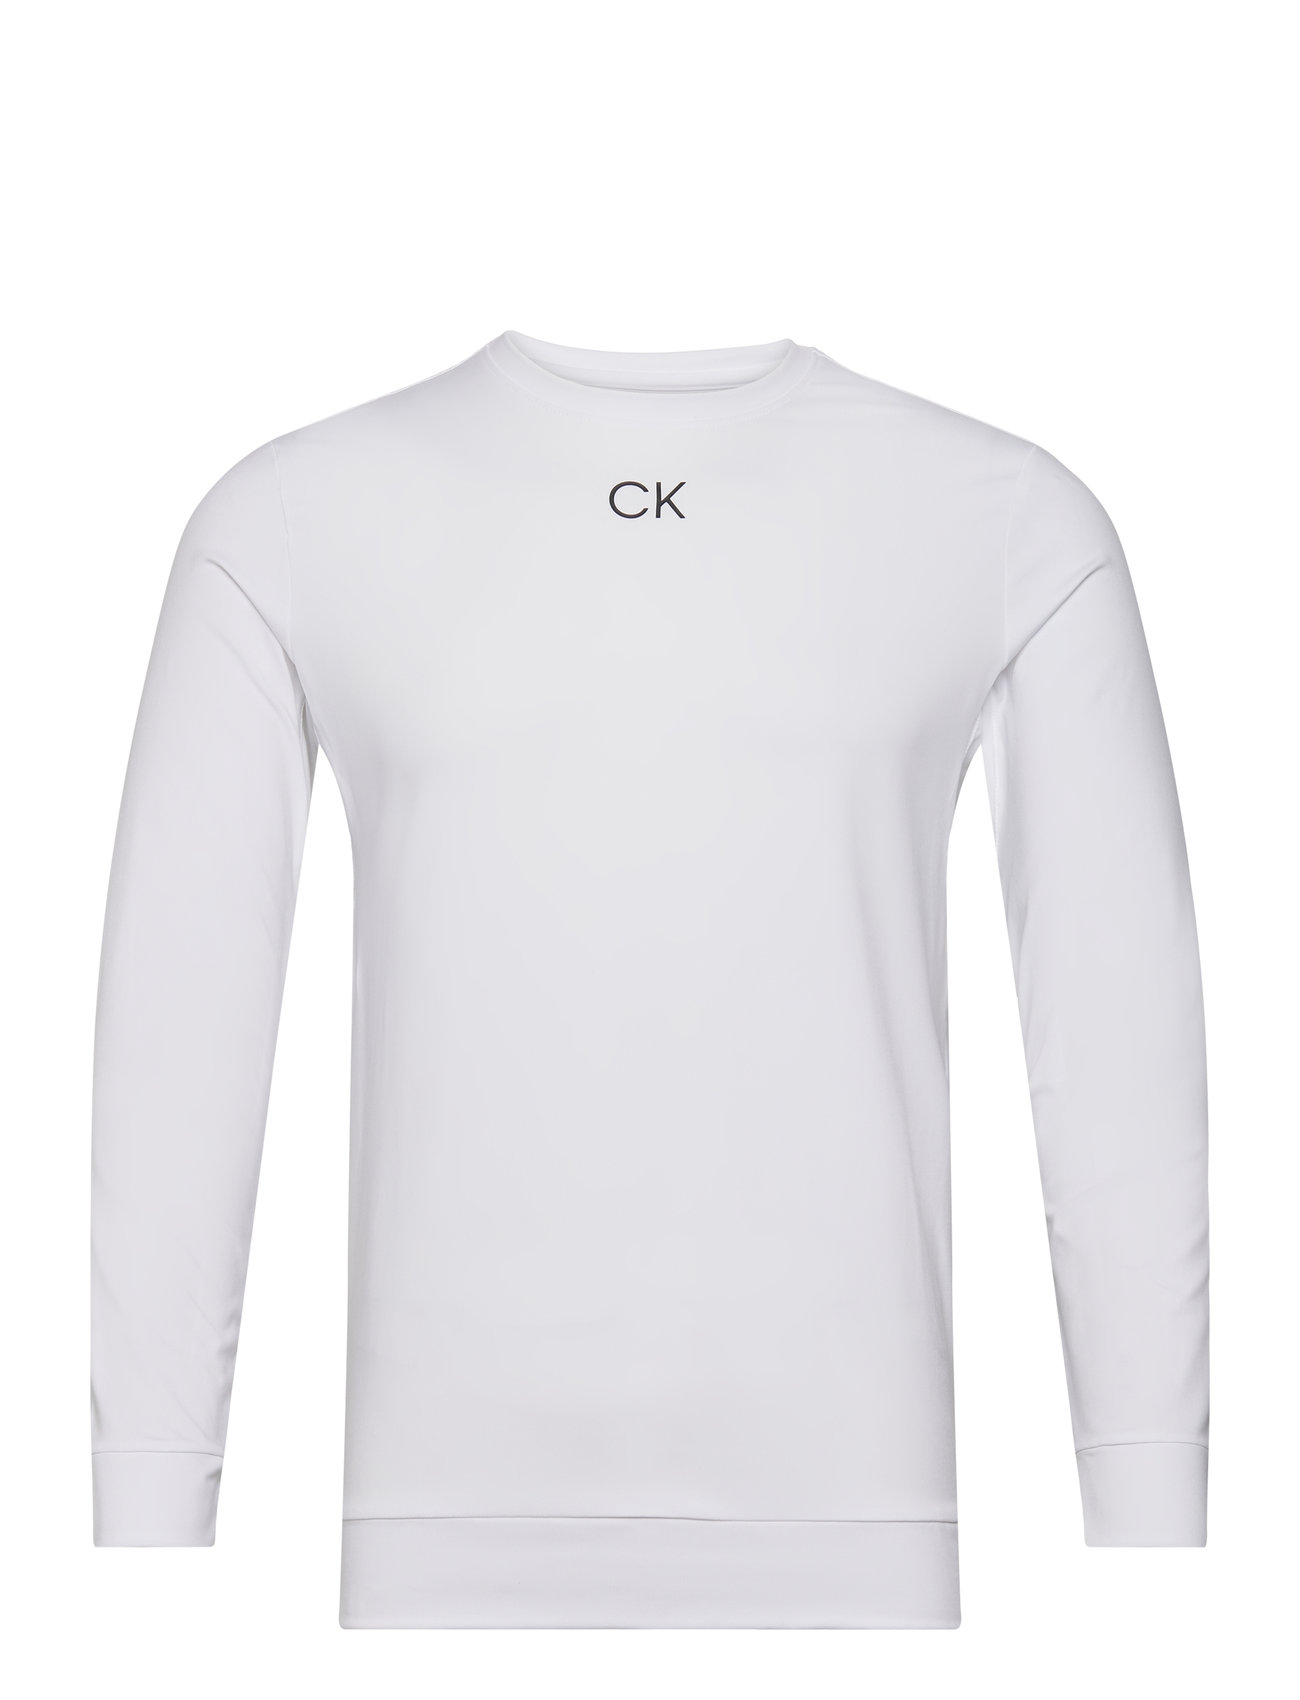 Baselayer With Ck Chest Print Sport Base Layer Tops White Calvin Klein Golf